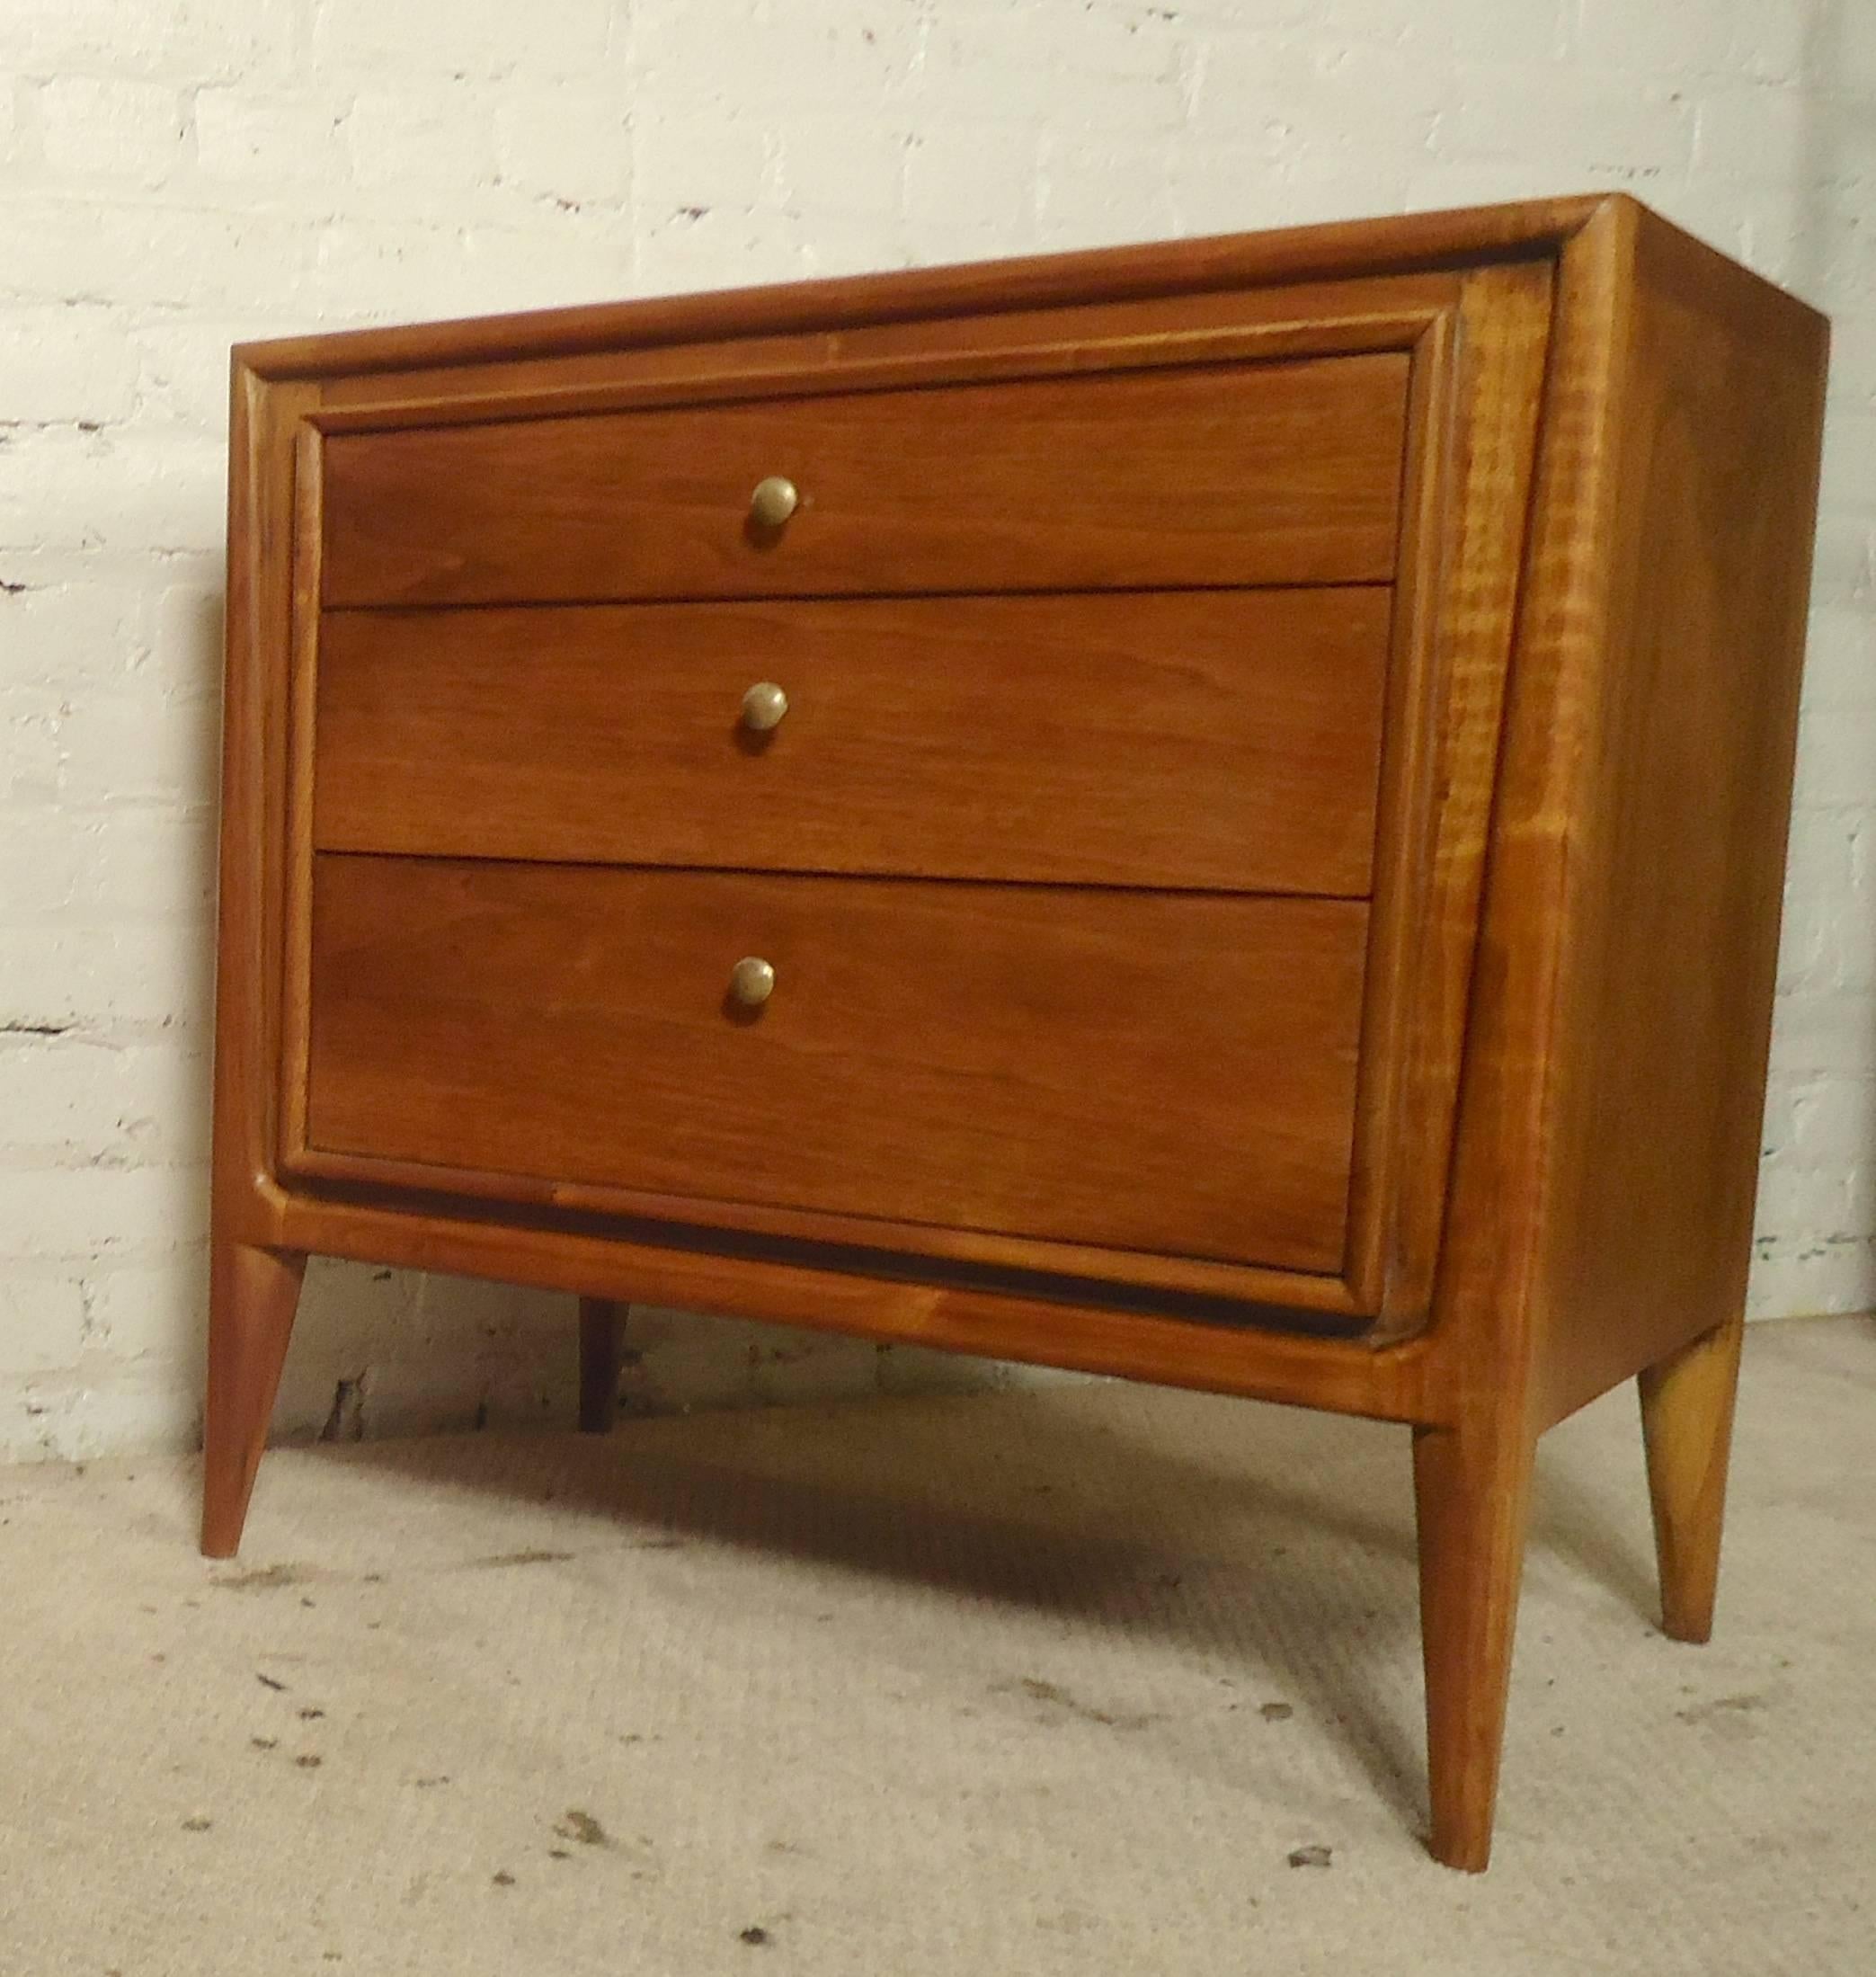 Attractive pair of bedside cabinets in walnut grain with sculpted window front, tapered legs and brass pulls.

(Please confirm item location - NY or NJ - with dealer)